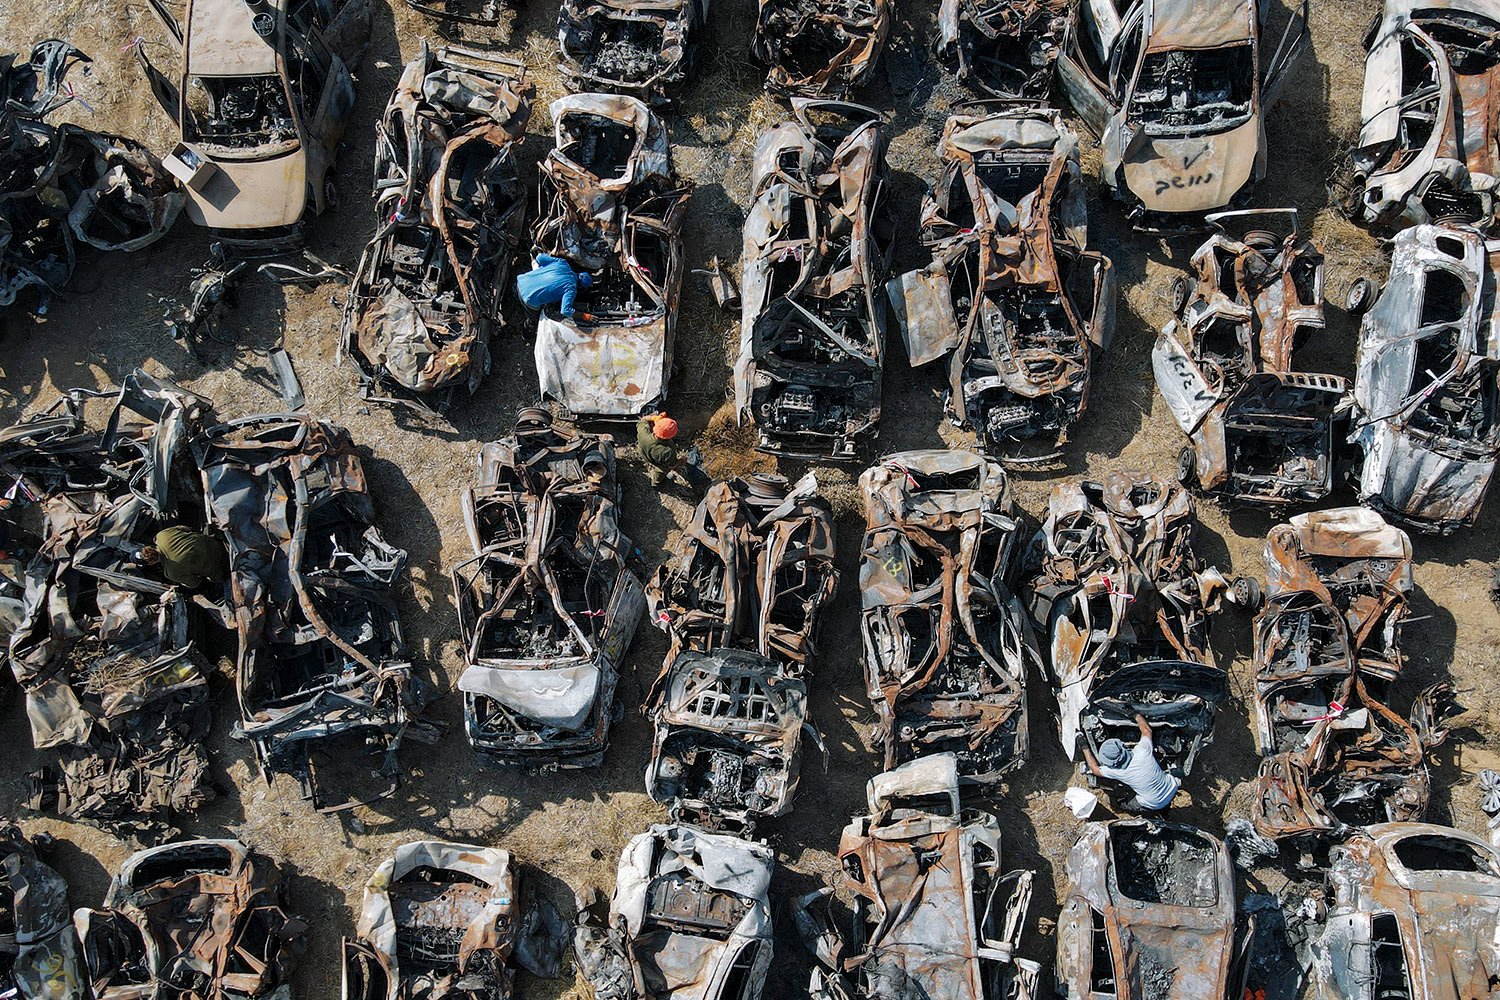  Israeli security forces inspect charred vehicles burned in the bloody Oct. 7 cross-border attack by Hamas militants outside the town of Netivot, southern Israel. (AP Photo/Ariel Schalit) 